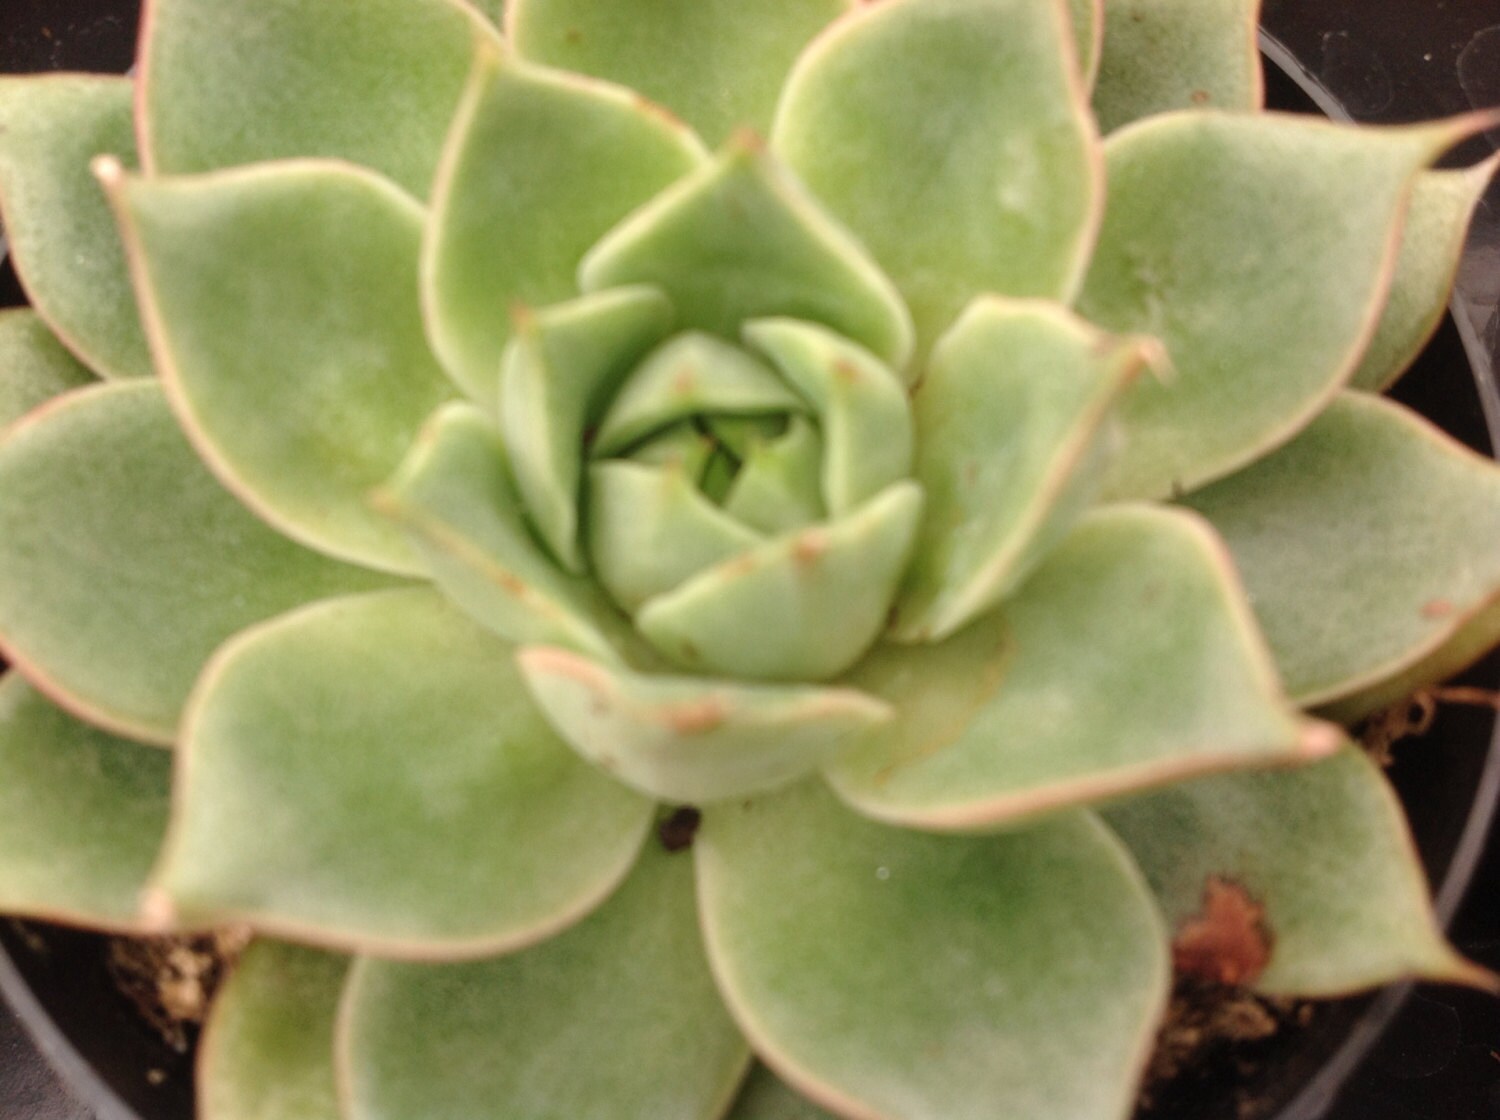 Echeveria parva native to Mexico forms green rosettes with